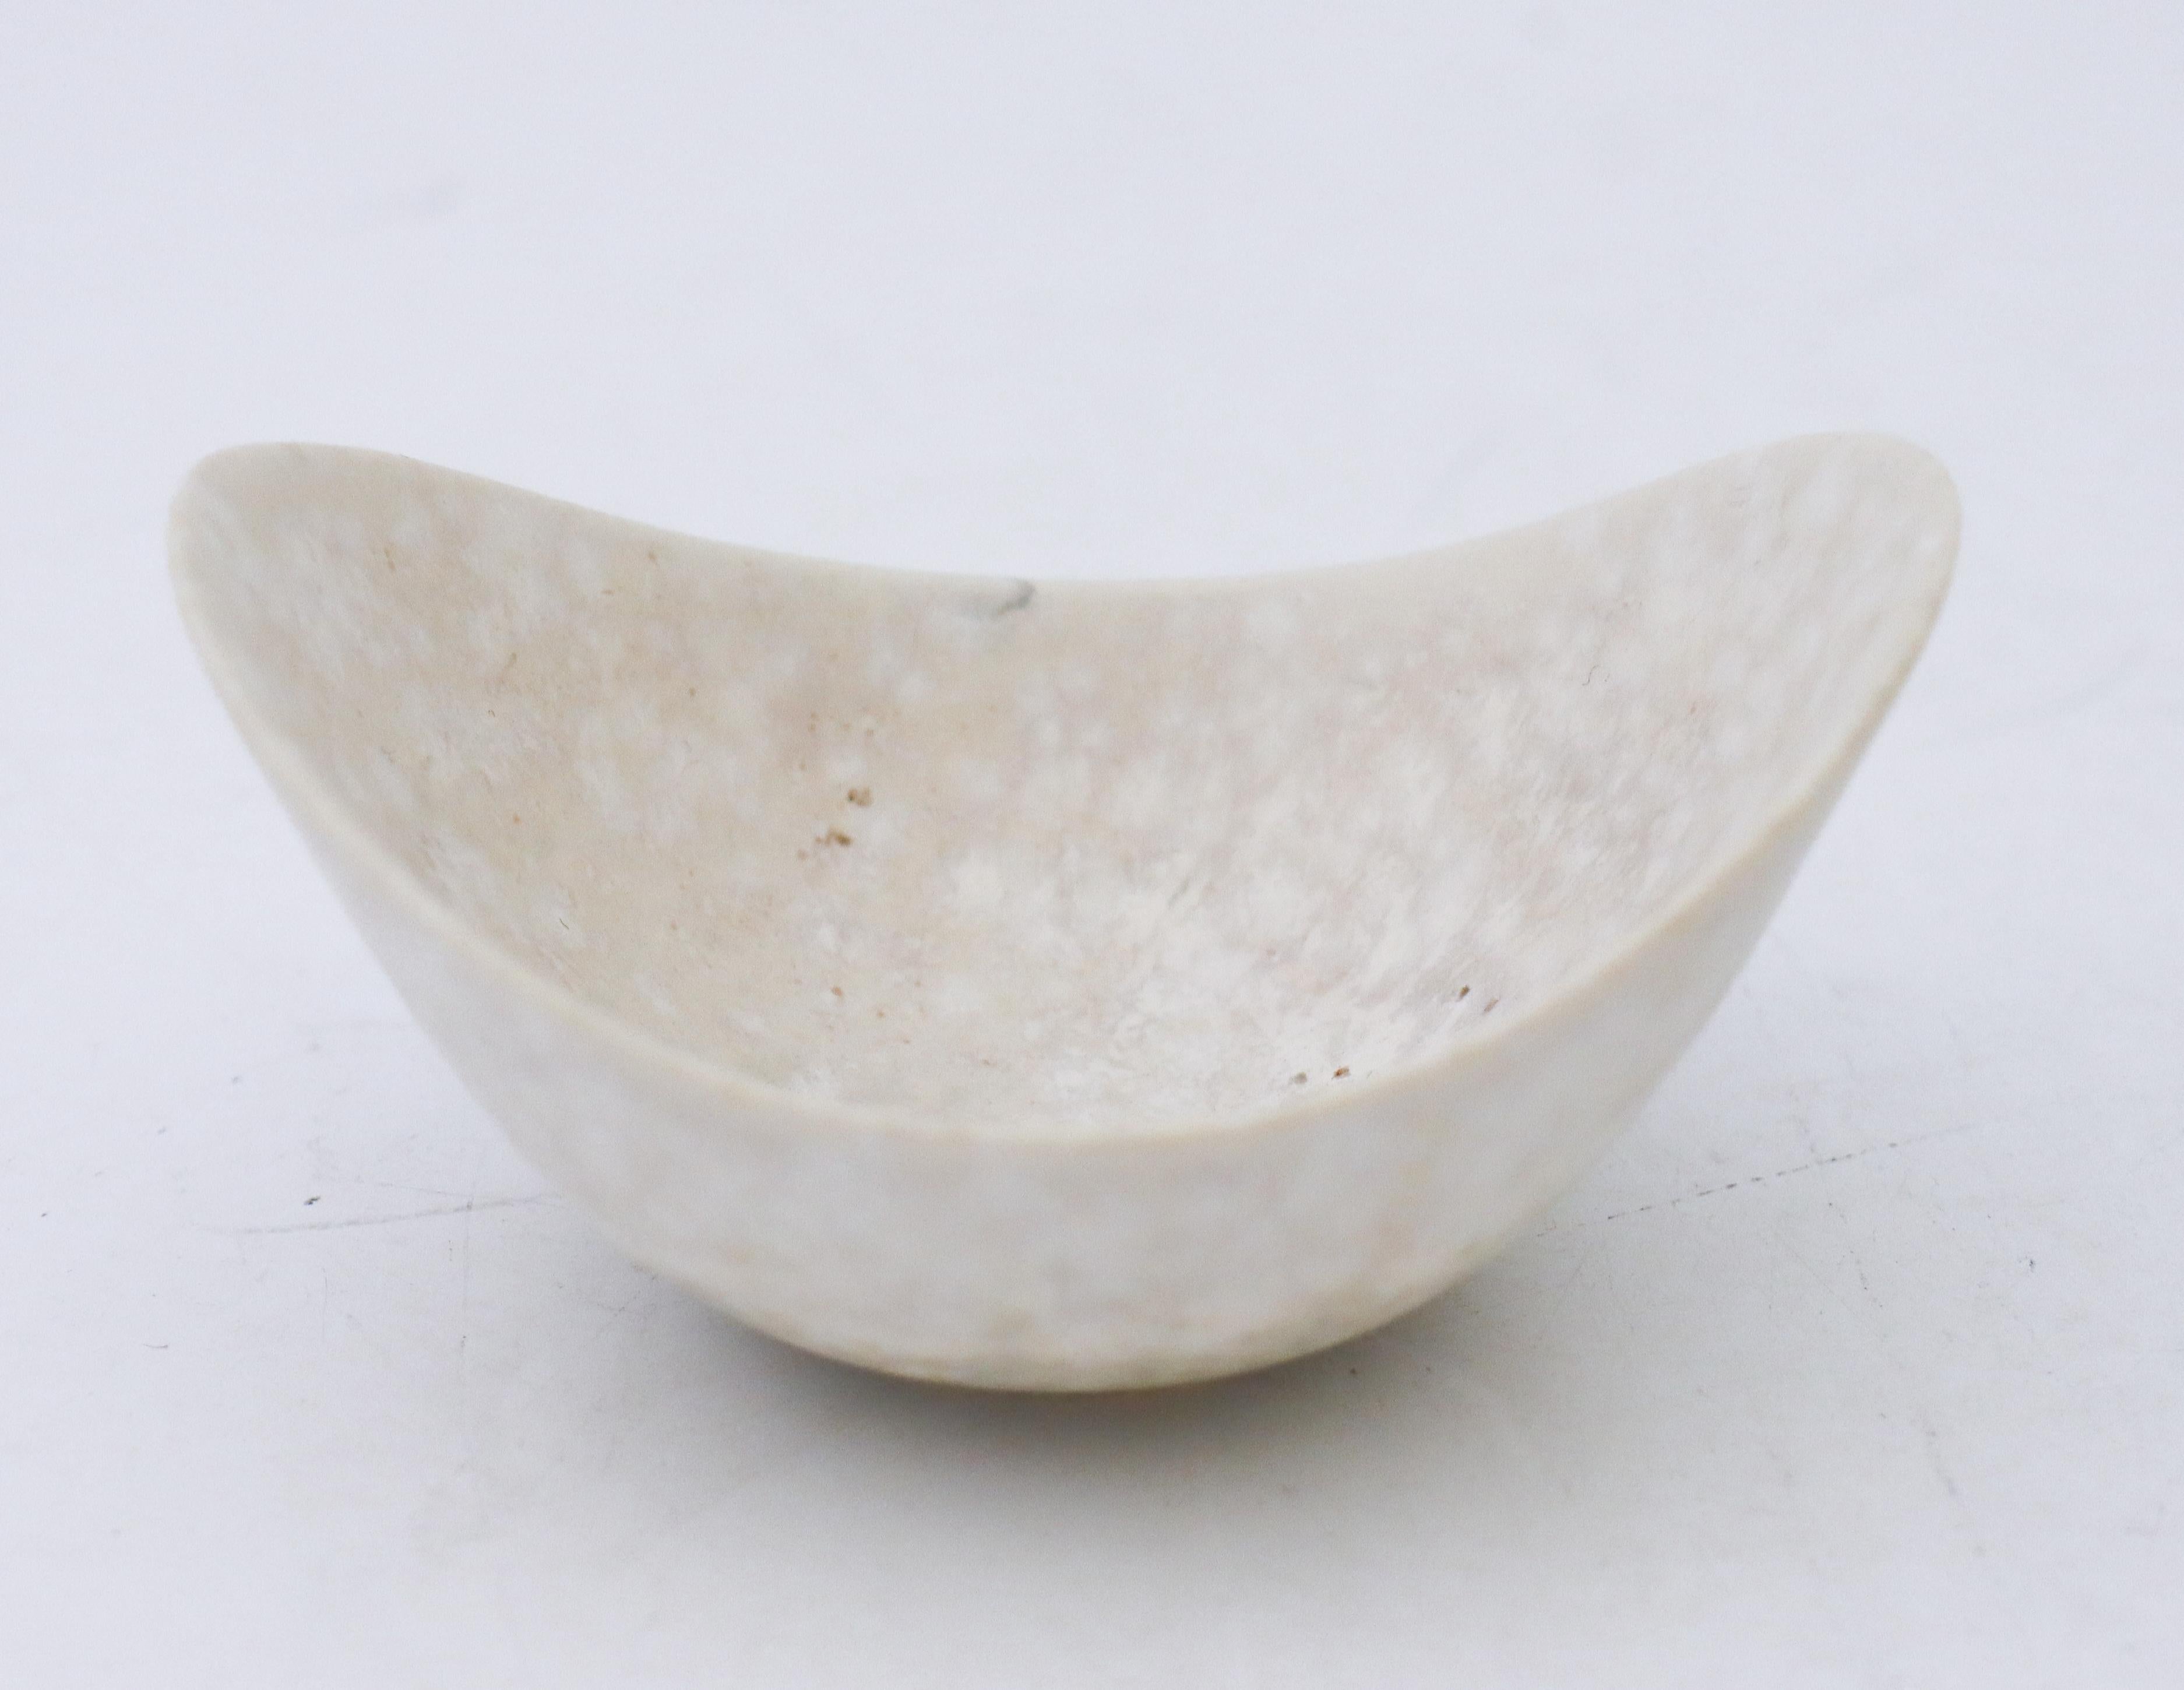 A lovely gray/white bowl with a beautiful glaze designed by Gunnar Nylund at Rörstrand, it´s 10 x 7.5 cm in diameter. It´s in very good condition except from some minor marks and scratches, it has a small crack from the production. It is marked as